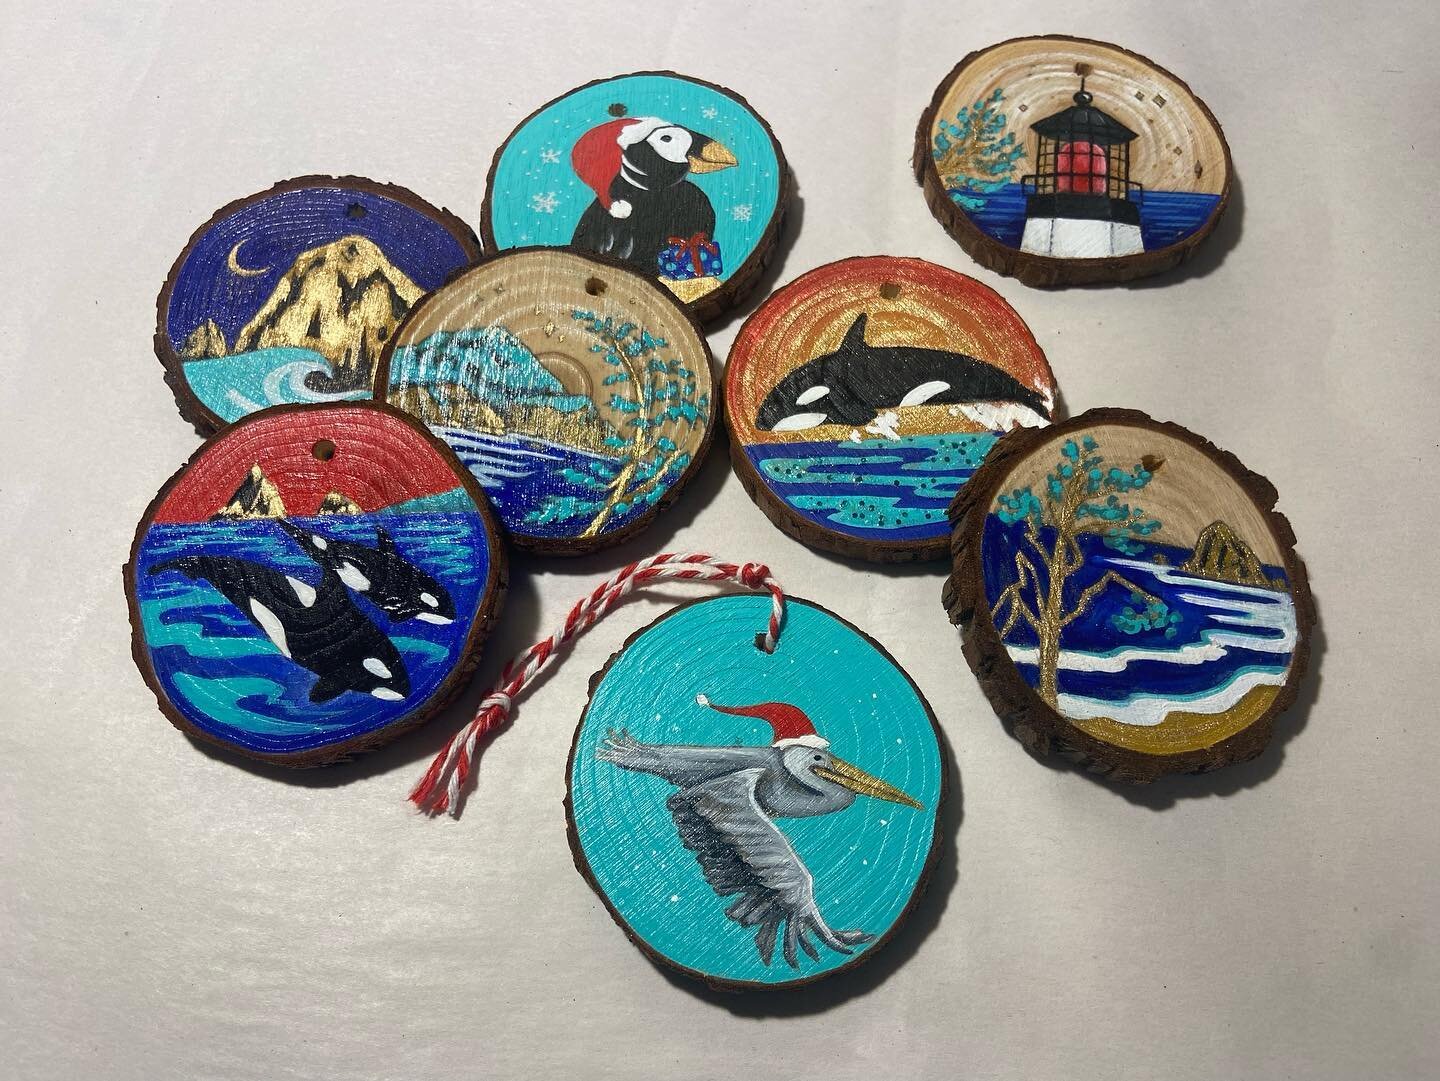 New hand painted Oregon coast-inspired ornaments!! Available now at @shearwatergallery in Cannon Beach or direct message me for direct sales &amp;/or custom ornaments! Tis the season! 🎁

#handpainted #oregonartist #oregoncoast #handpaintedornaments 